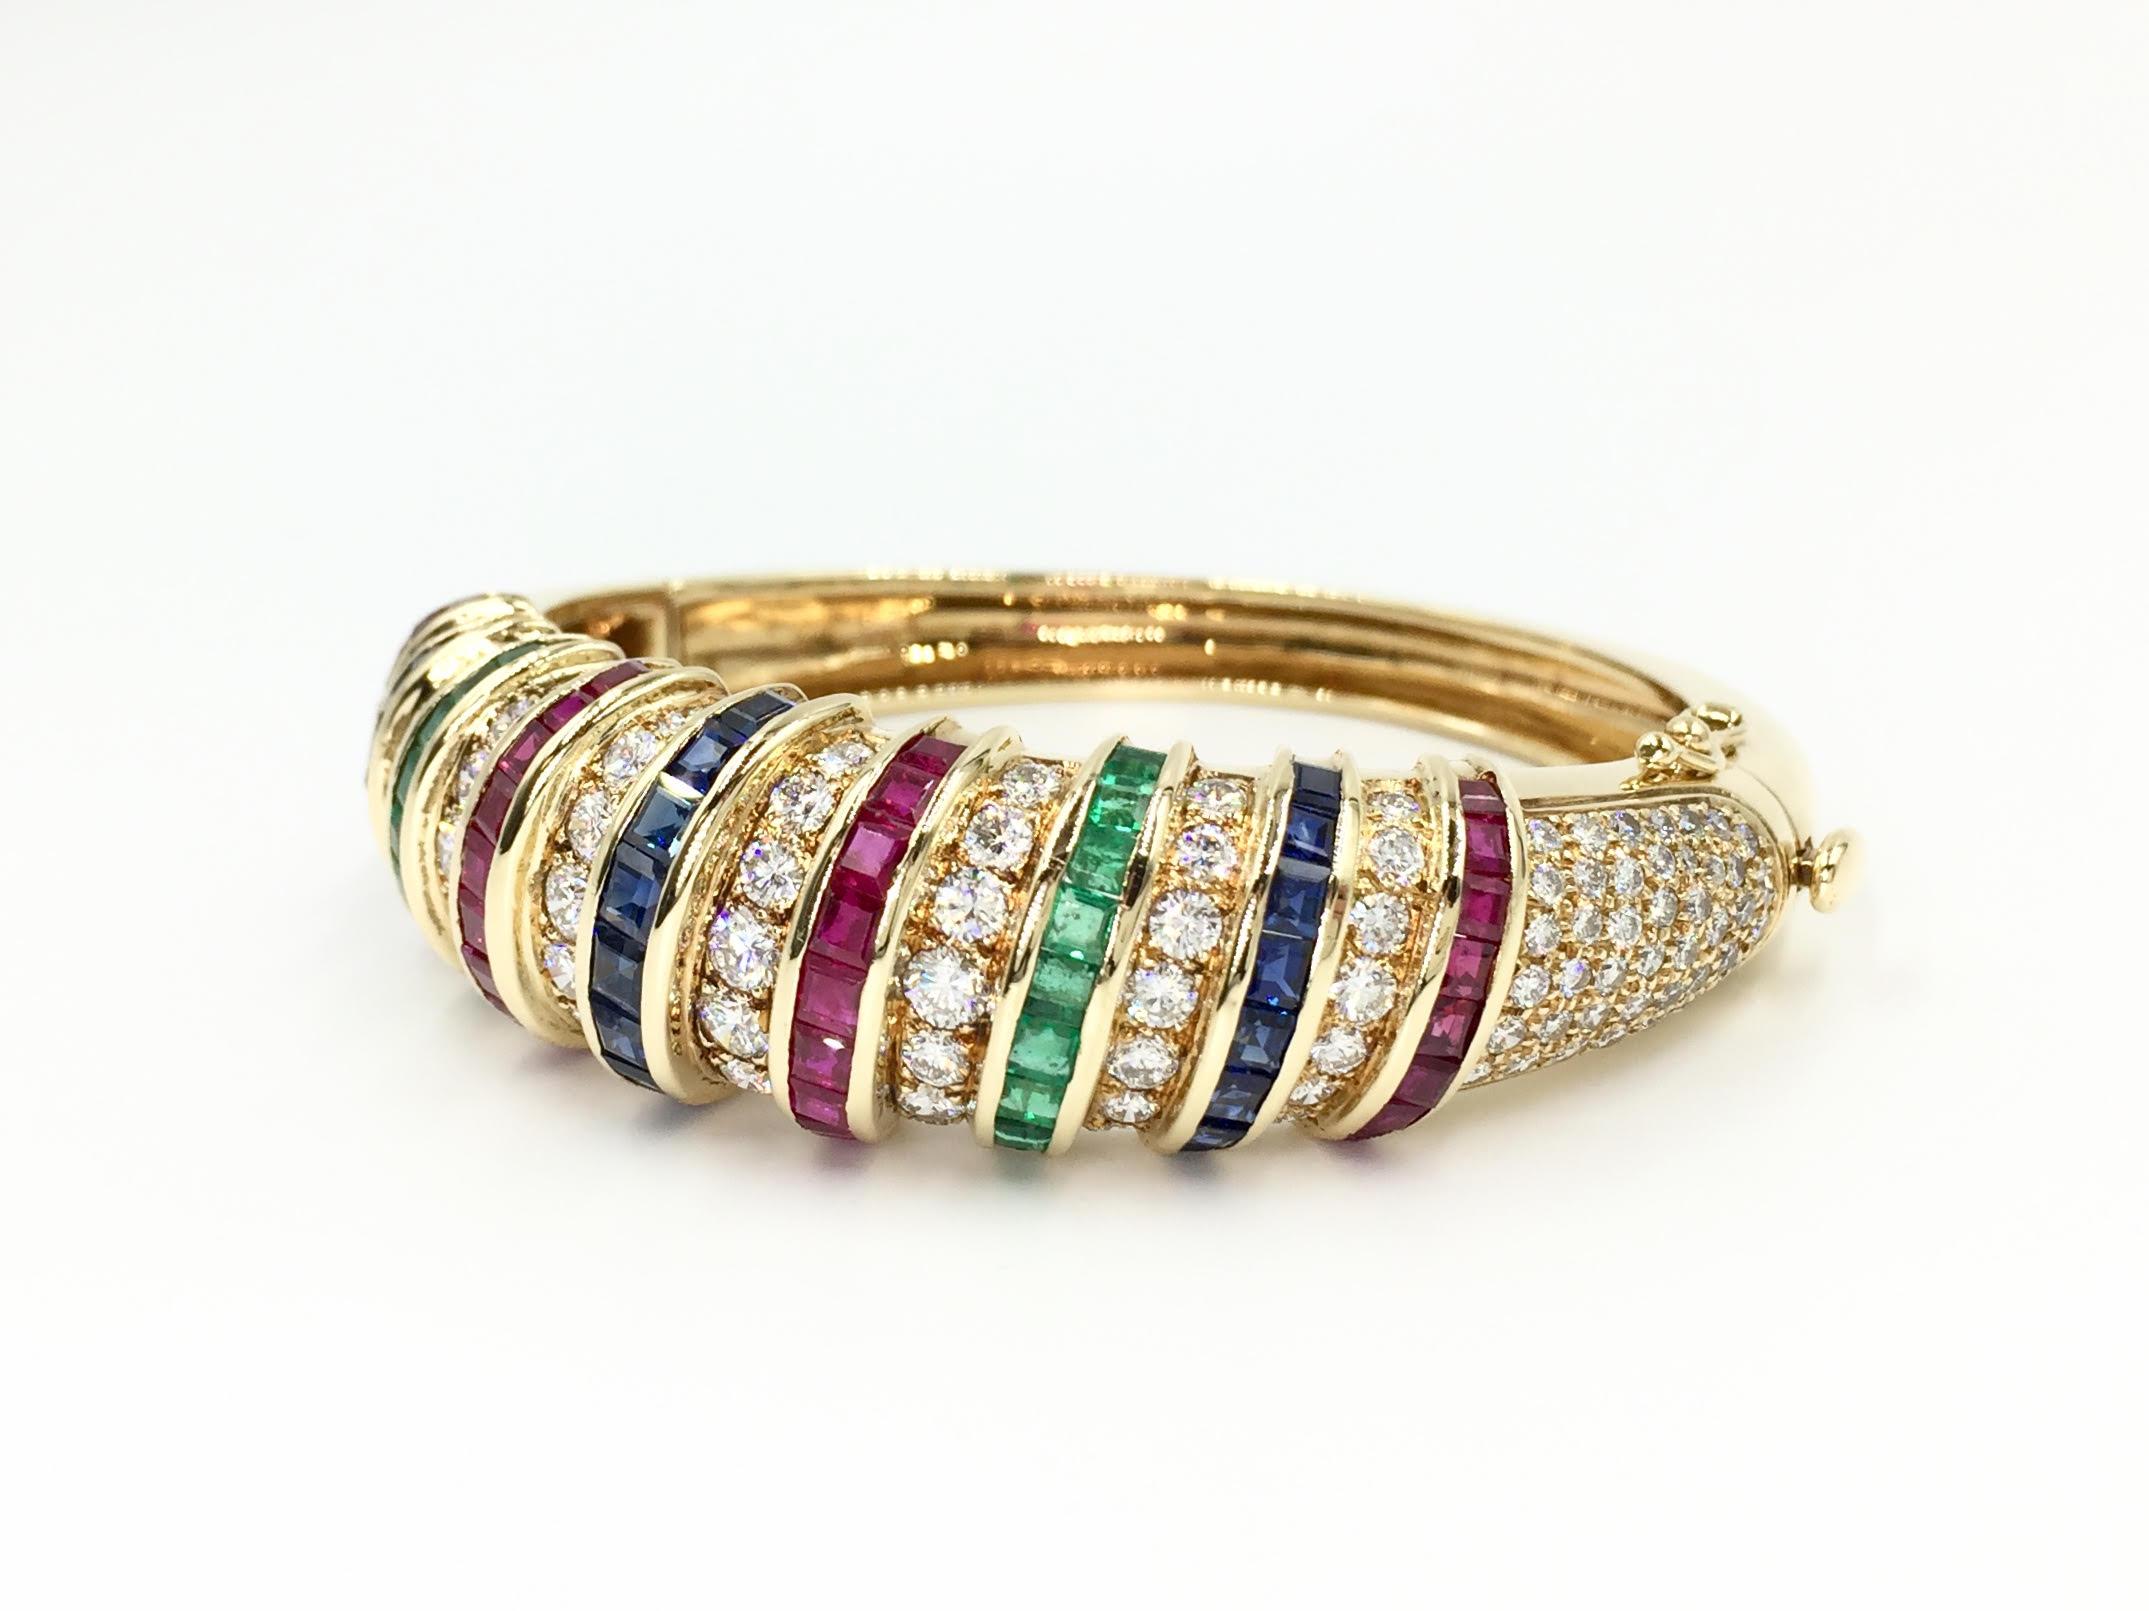 A beautiful 18 karat yellow gold bangle bracelet featuring high quality diamonds (approximately F color, VS2-SI1) rich royal blue sapphires, vibrant rubies and vivid emeralds. Precious colored stones are all of very fine quality and expertly set in